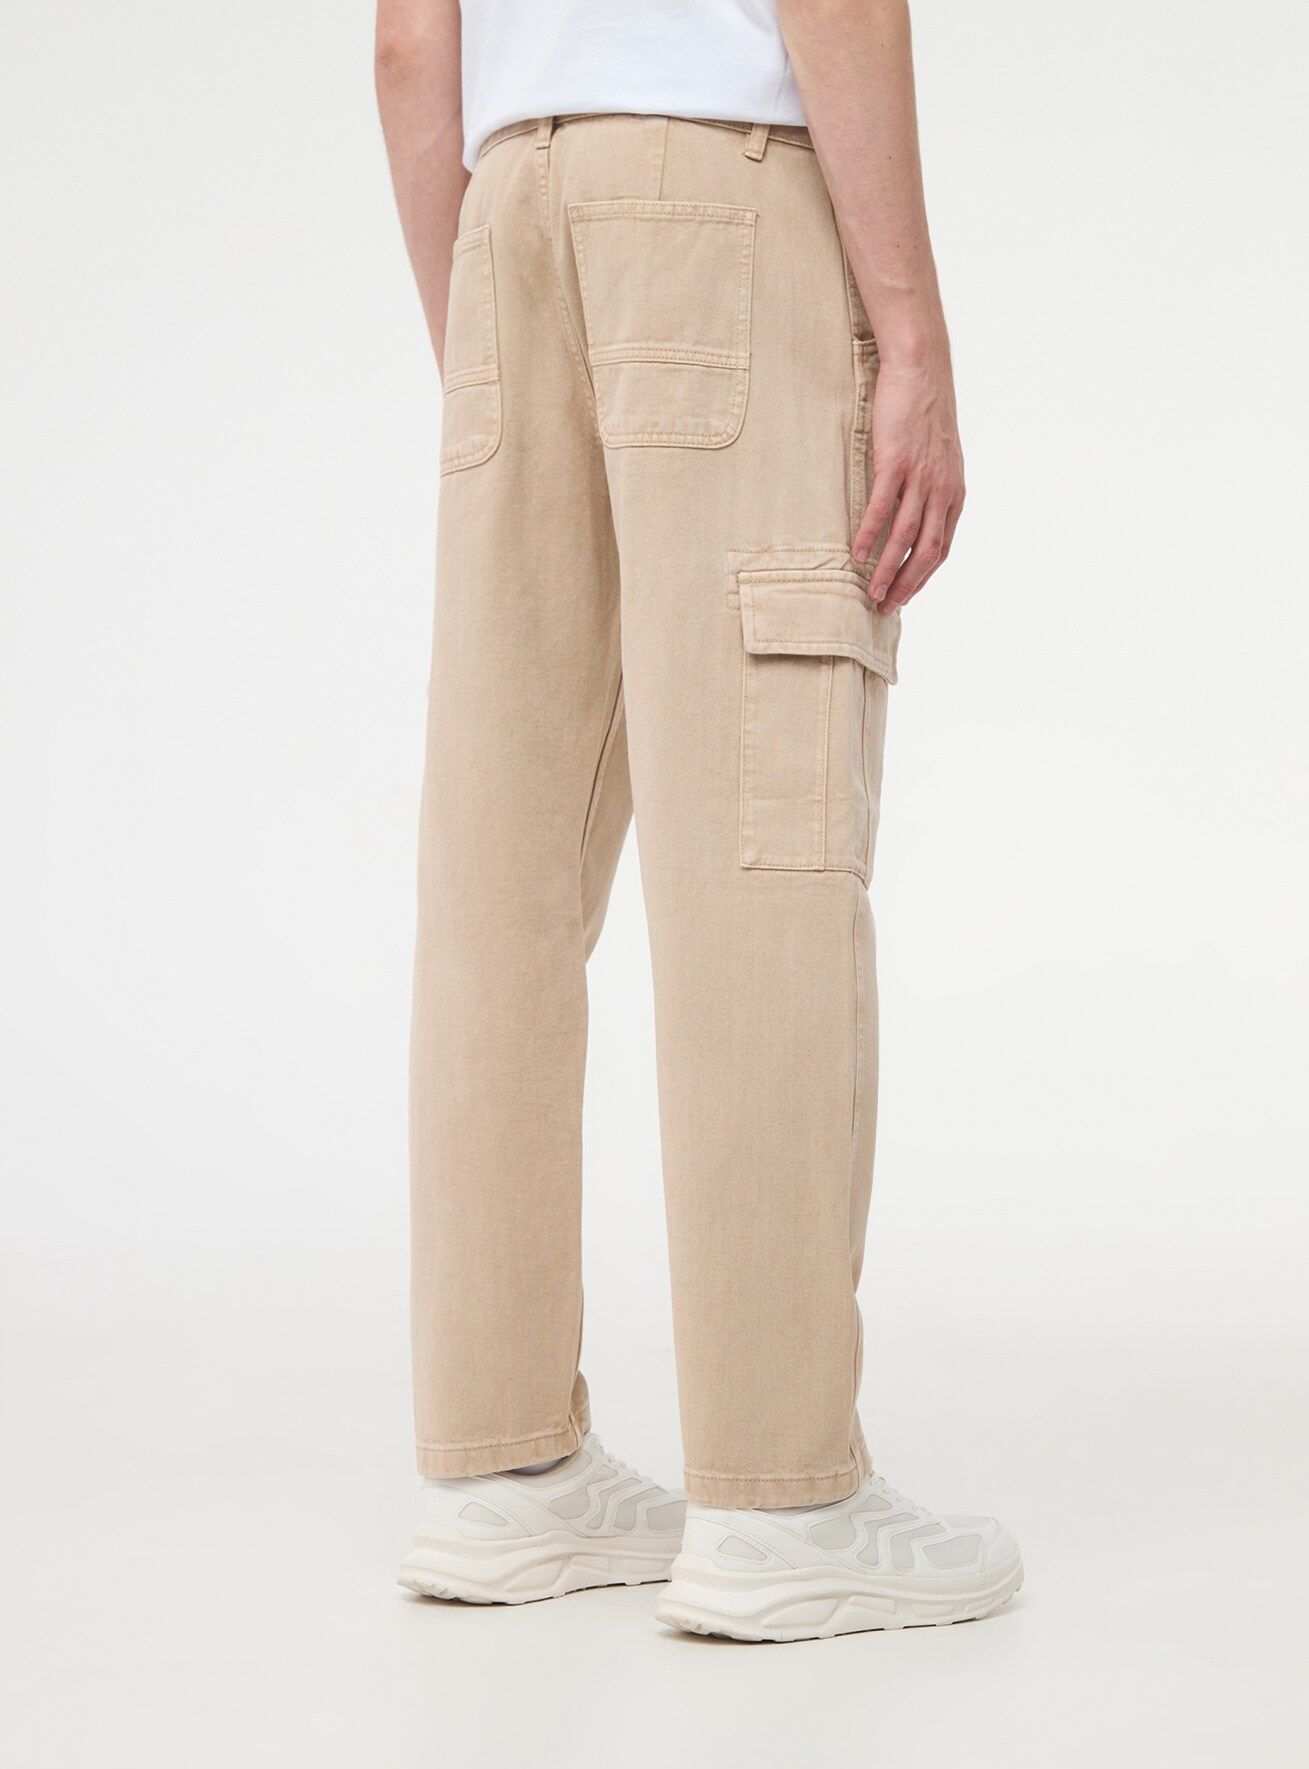 Unbranded Men Cargo Pants Trousers Baggy Loose Pleated Long India | Ubuy